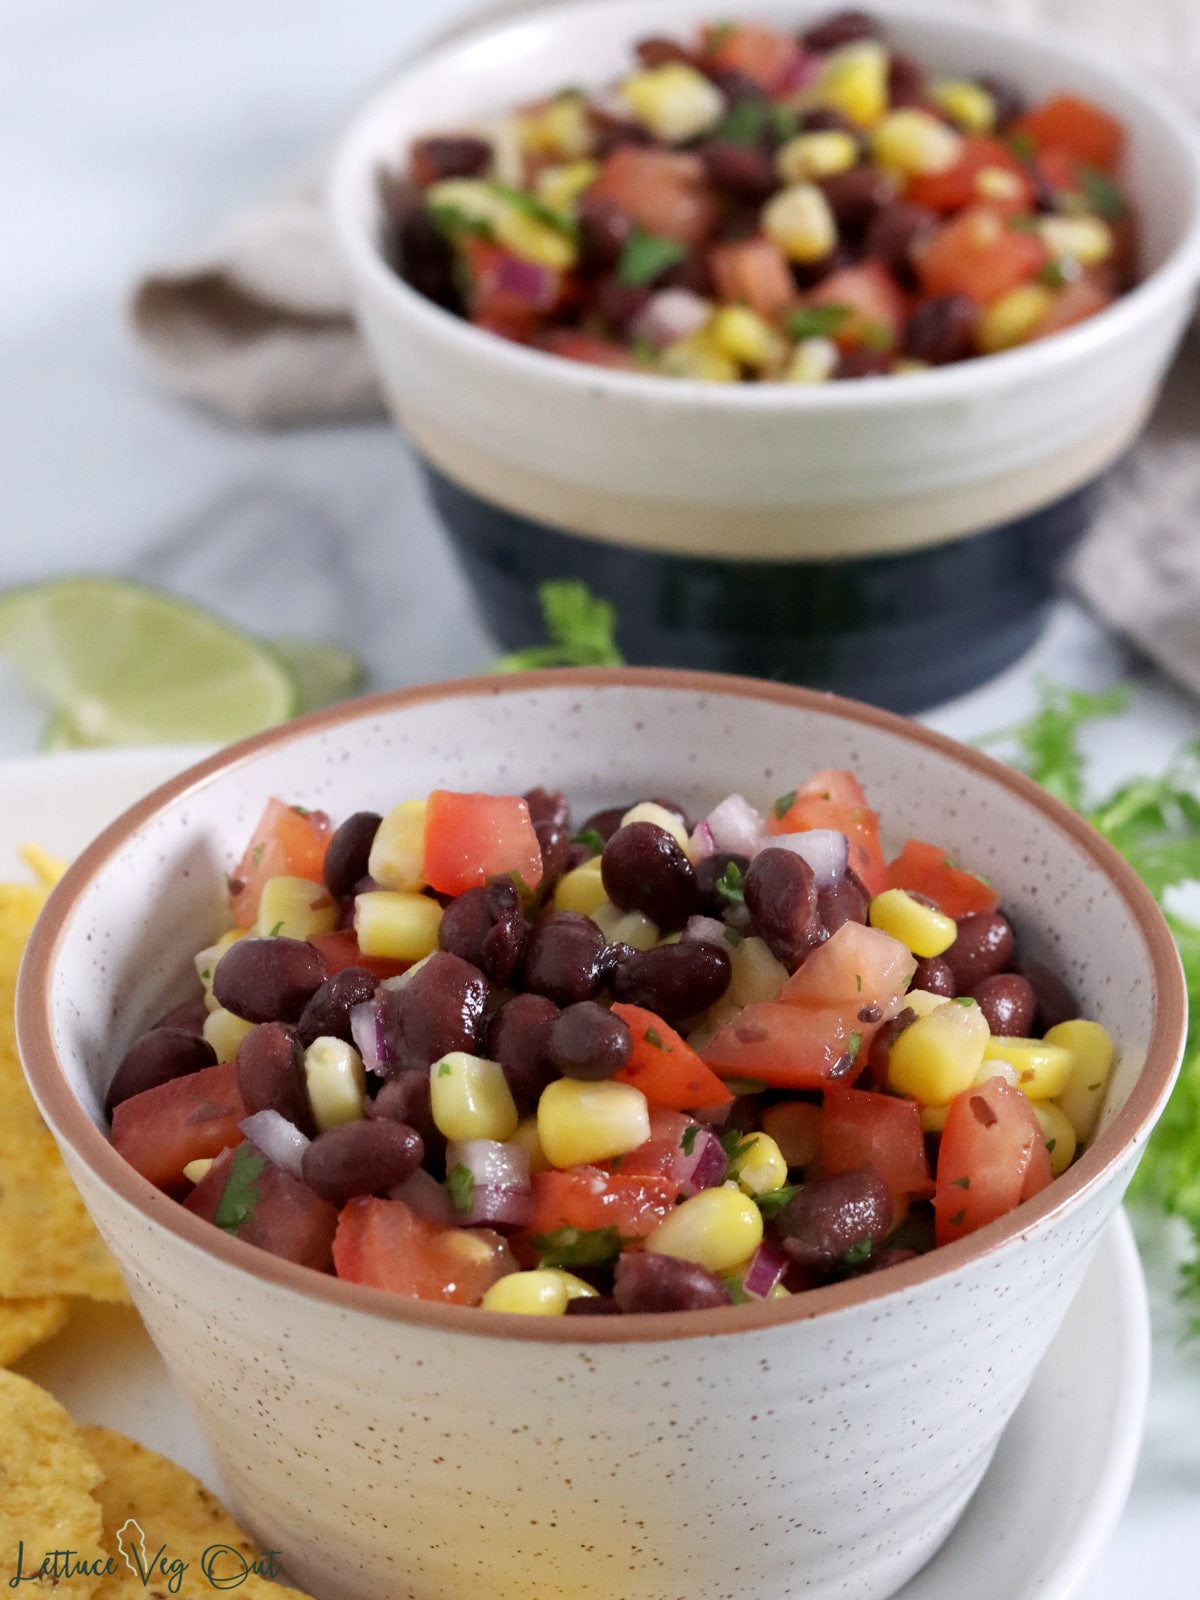 Two bowls filled with black bean and corn dip along with tomatoes, red onion and chopped cilantro.